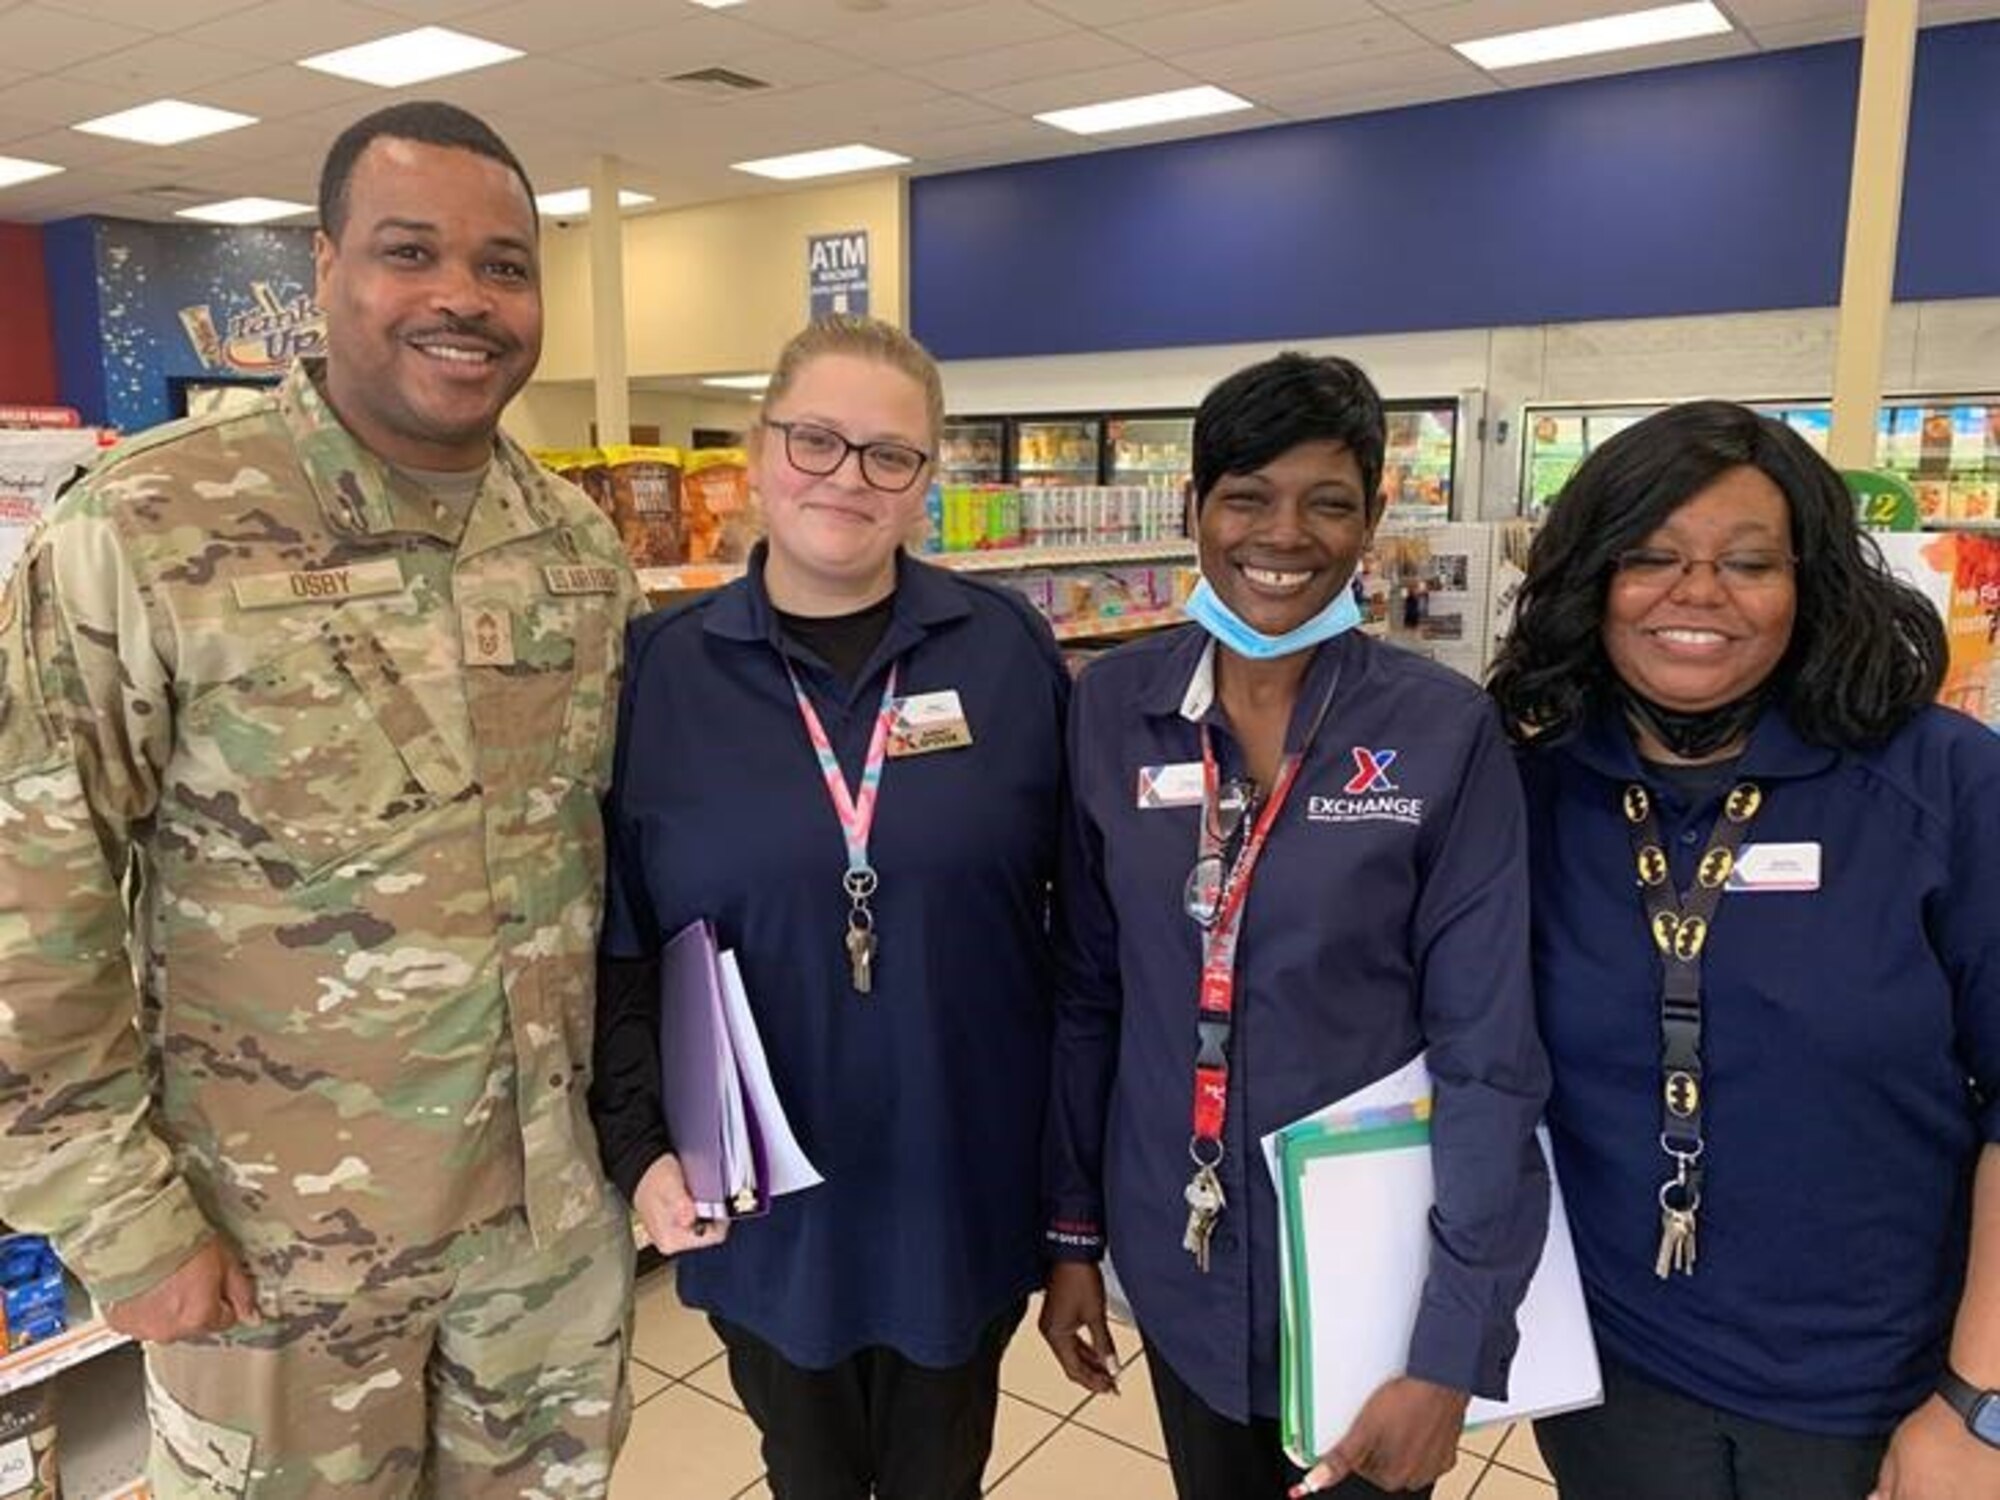 During a visit to Maxwell AFB, Air Force Chief Master Sgt. Kevin Osby toured the Exchange shopping center and Express.